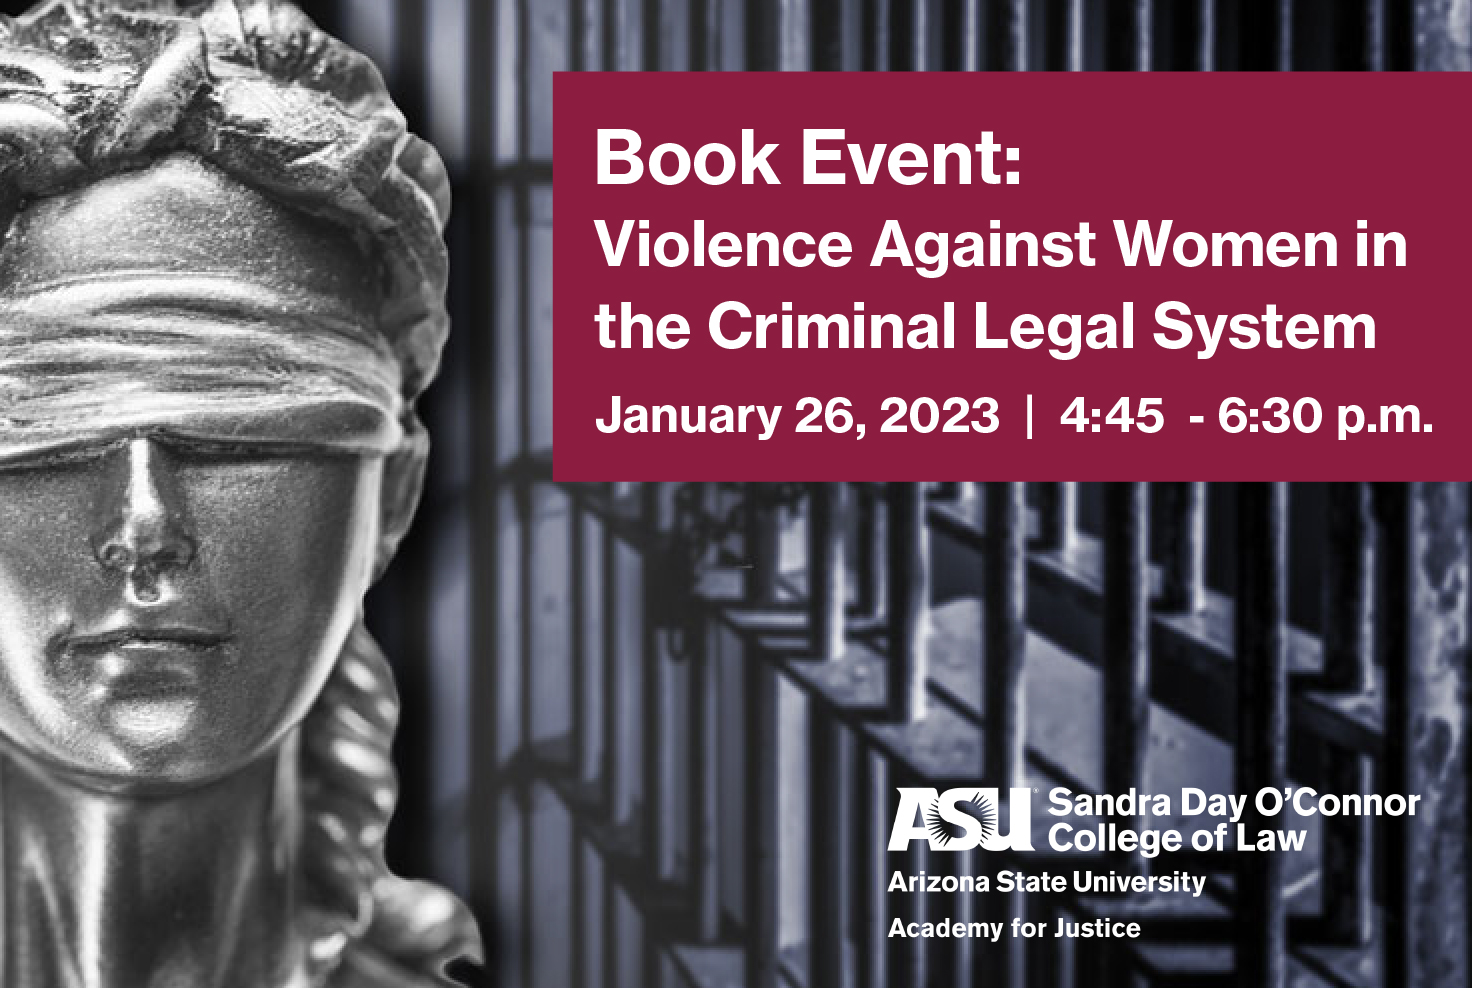 Book Event: Violence Against women in the criminal legal system, January 26, 2023, 4:45 to 6:30 p.m.